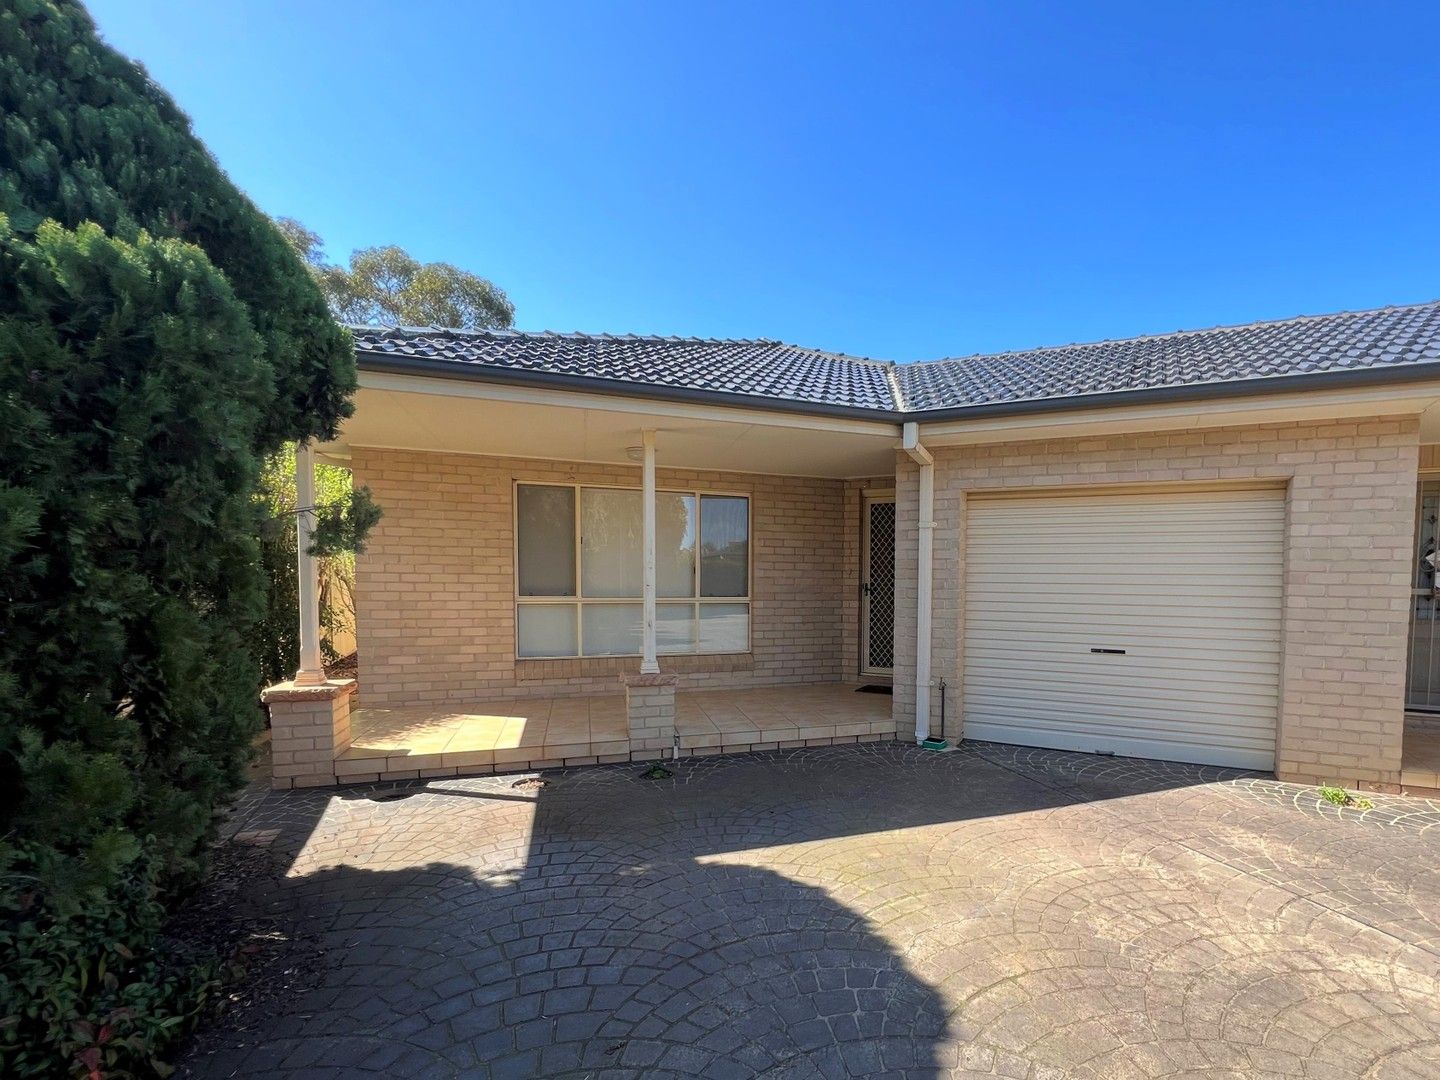 3 bedrooms Apartment / Unit / Flat in 4/13 Powys Place GRIFFITH NSW, 2680